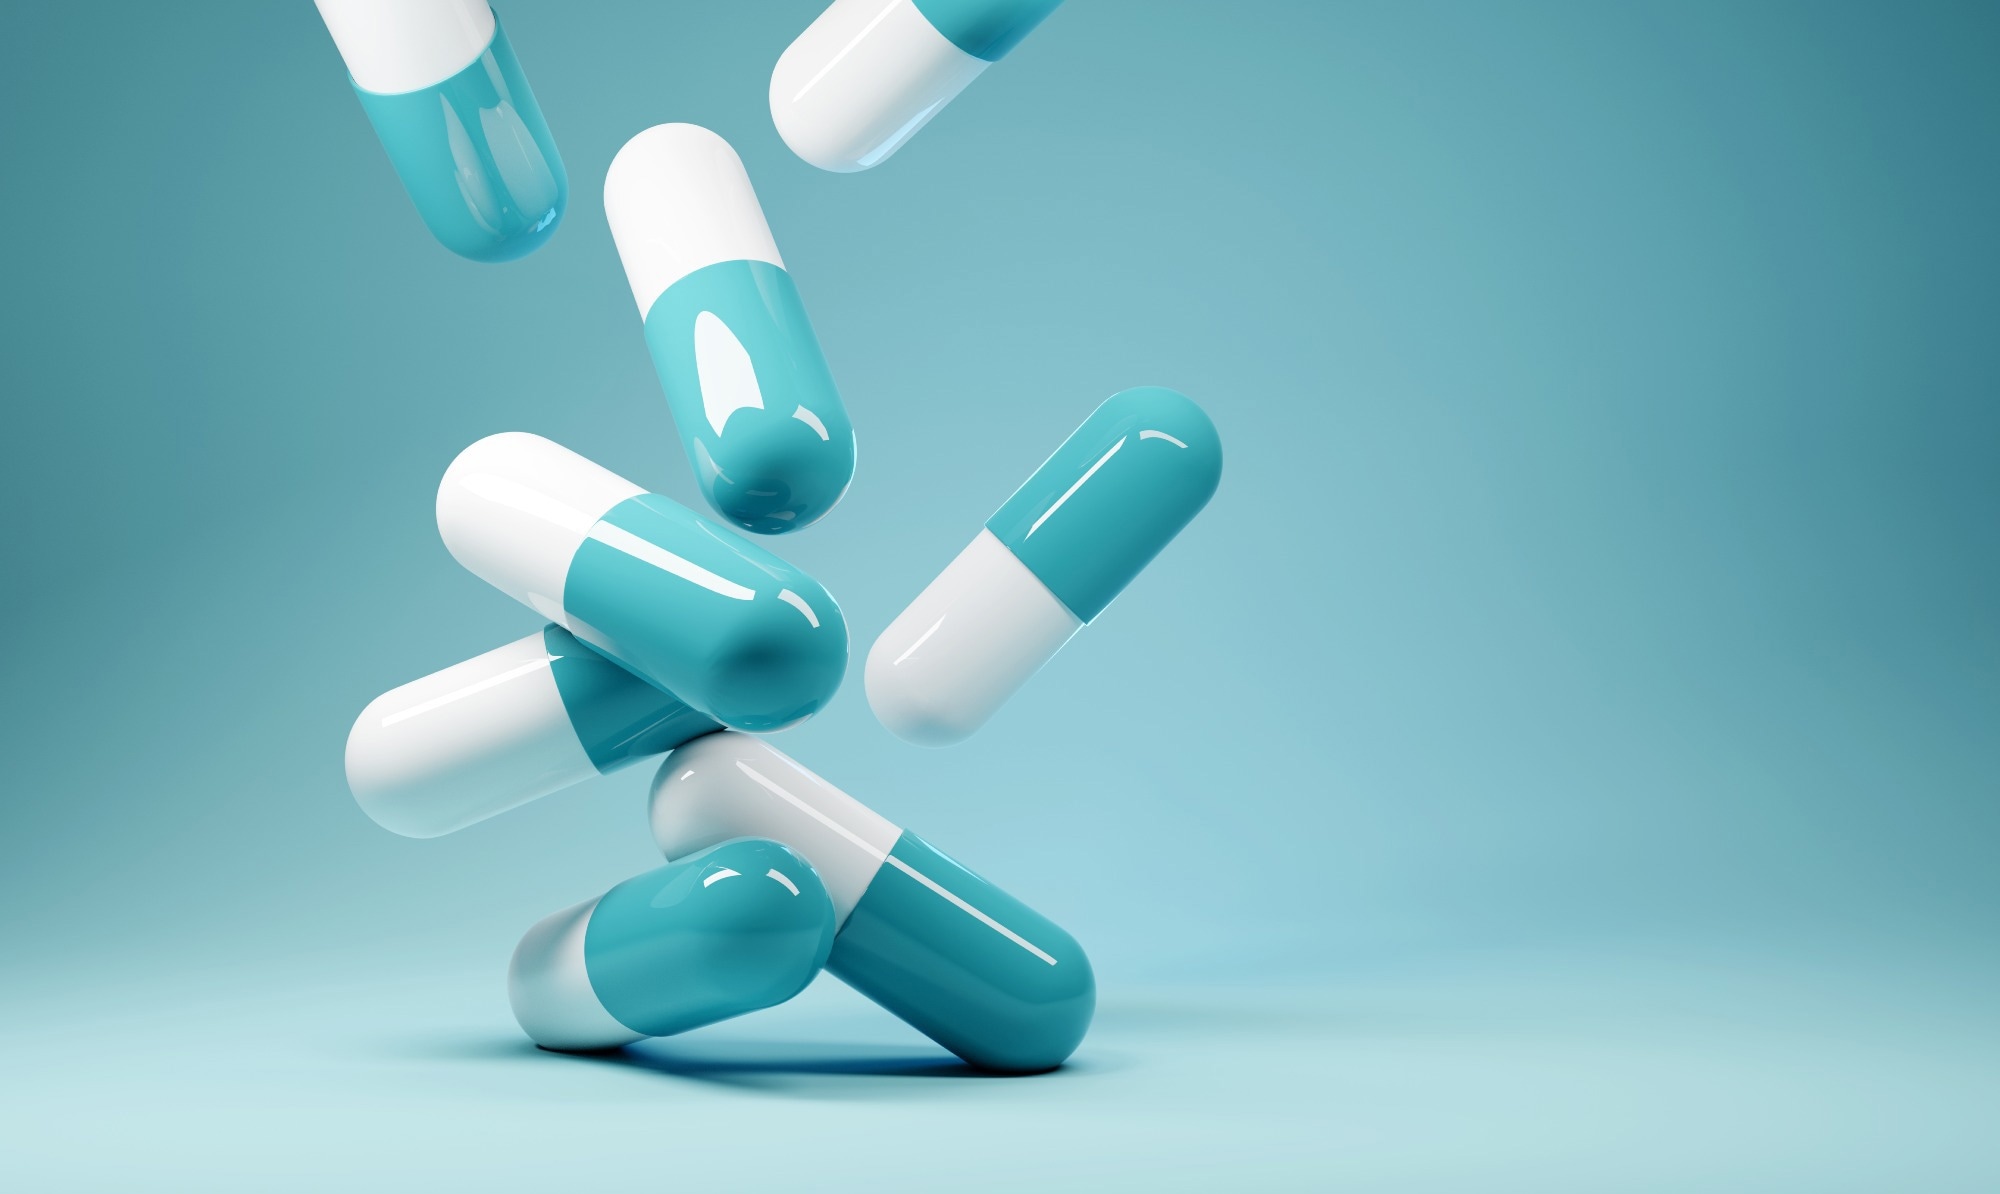 Study: Impact of adherence to procalcitonin antibiotic prescribing guideline recommendations for low procalcitonin levels on antibiotic use. Image Credit: solarseven / Shutterstock